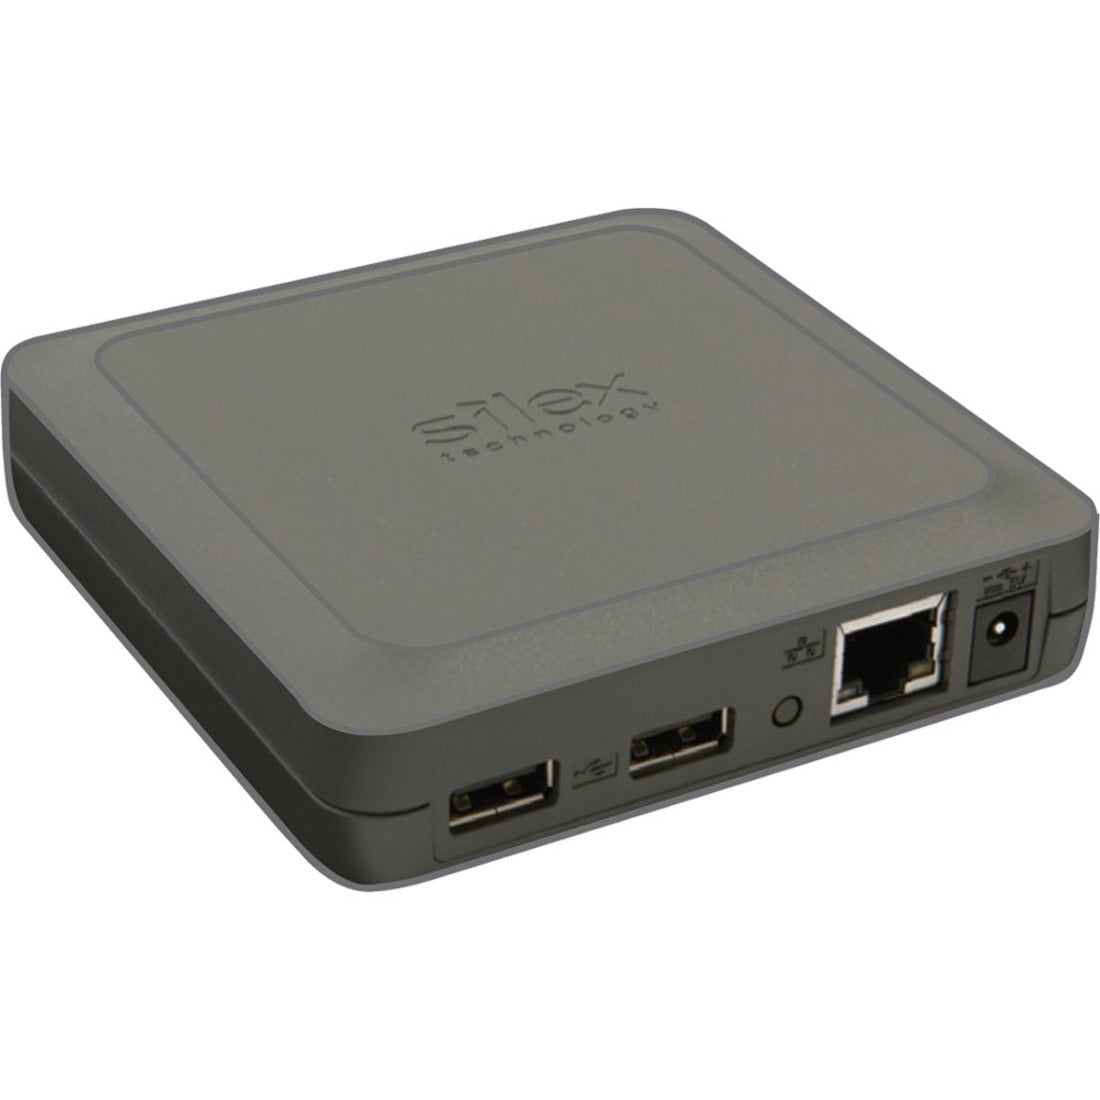 Silex DS-510(US) Wired USB Device Server, 2X USB 2.0 10/100/1000 Ethernet